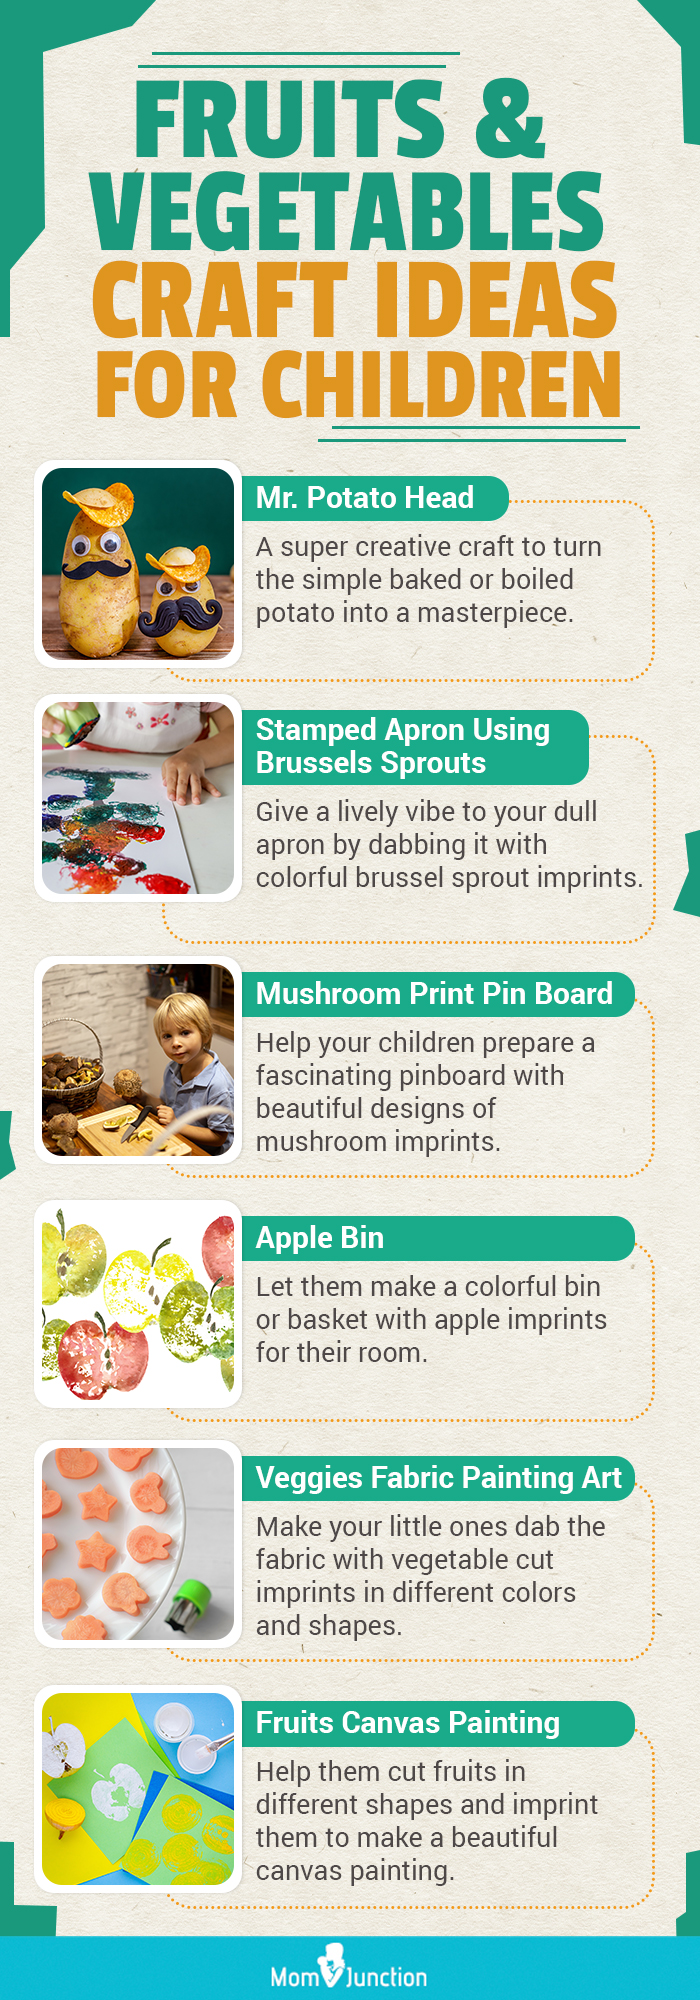 fruits & vegetables craft ideas for children (infographic)